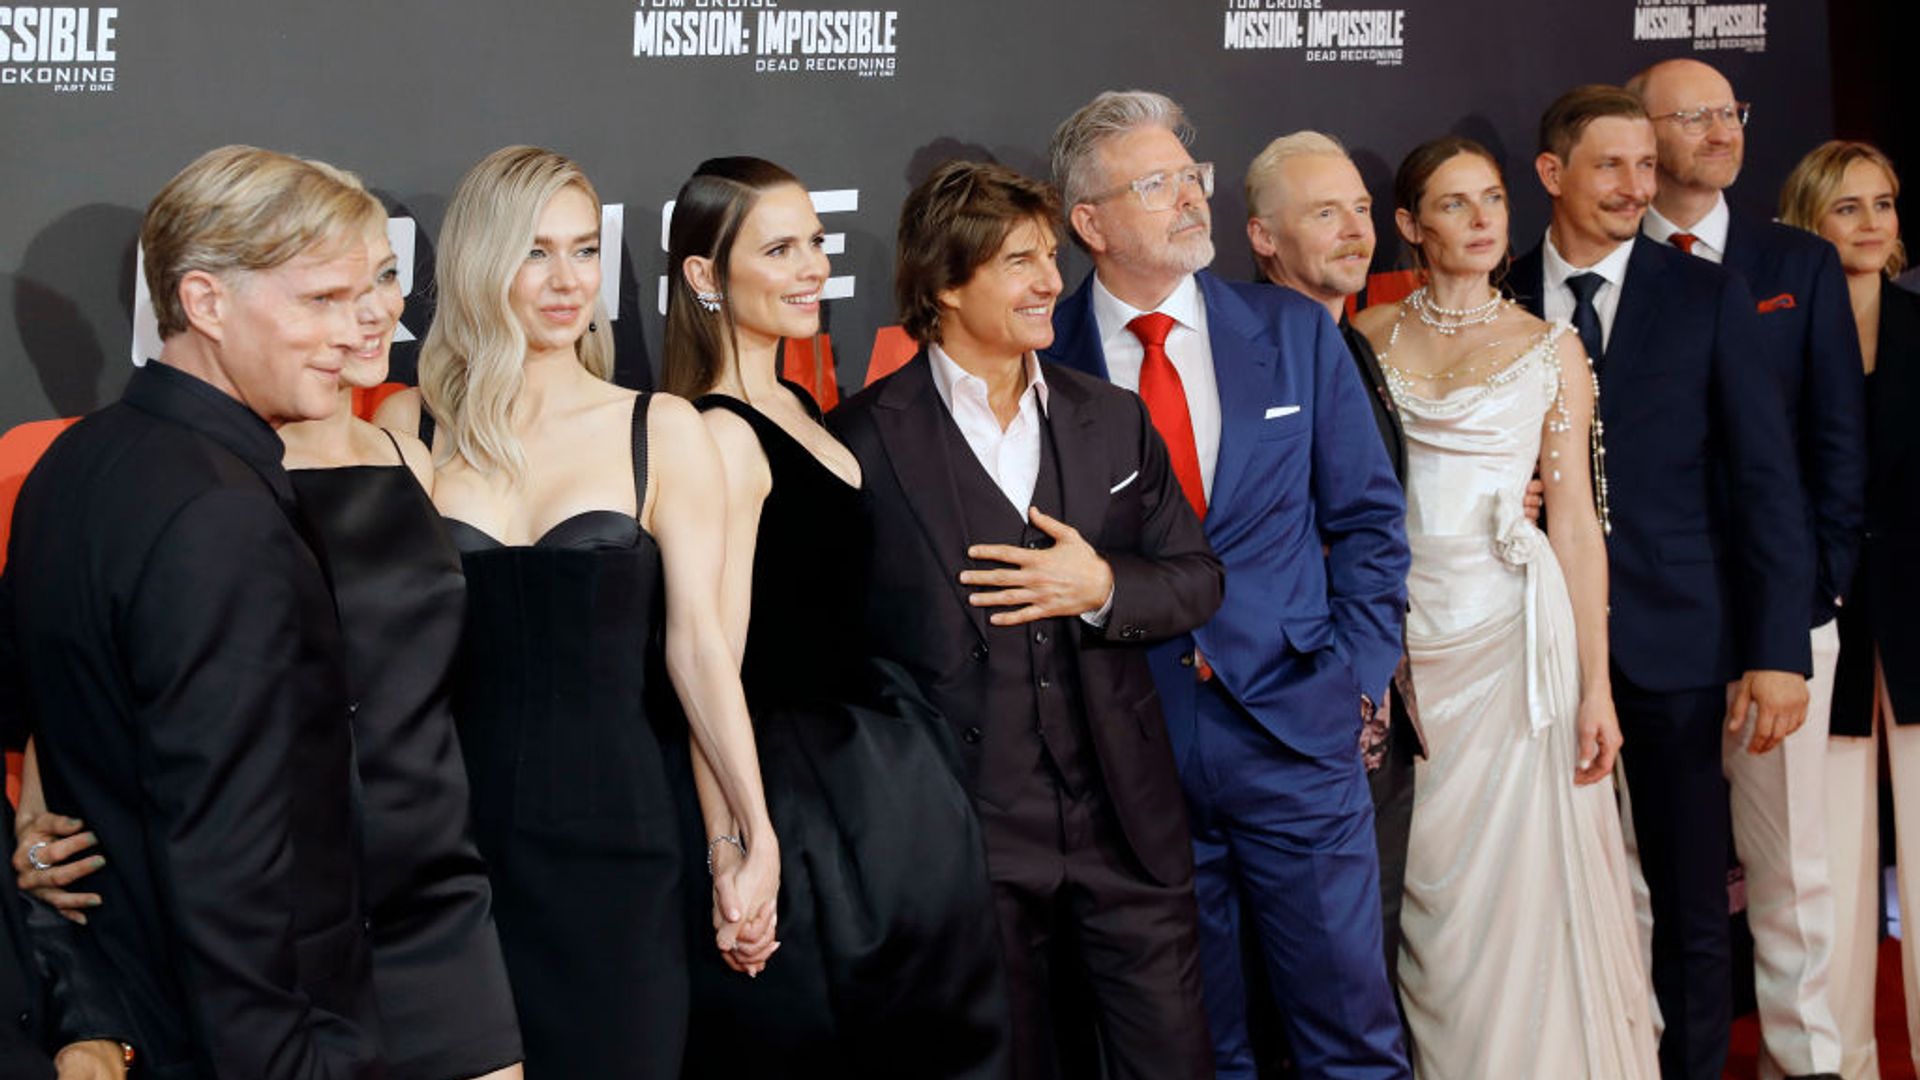 The entire Mission: Impossible 7 cast posed together on the red carpet. 